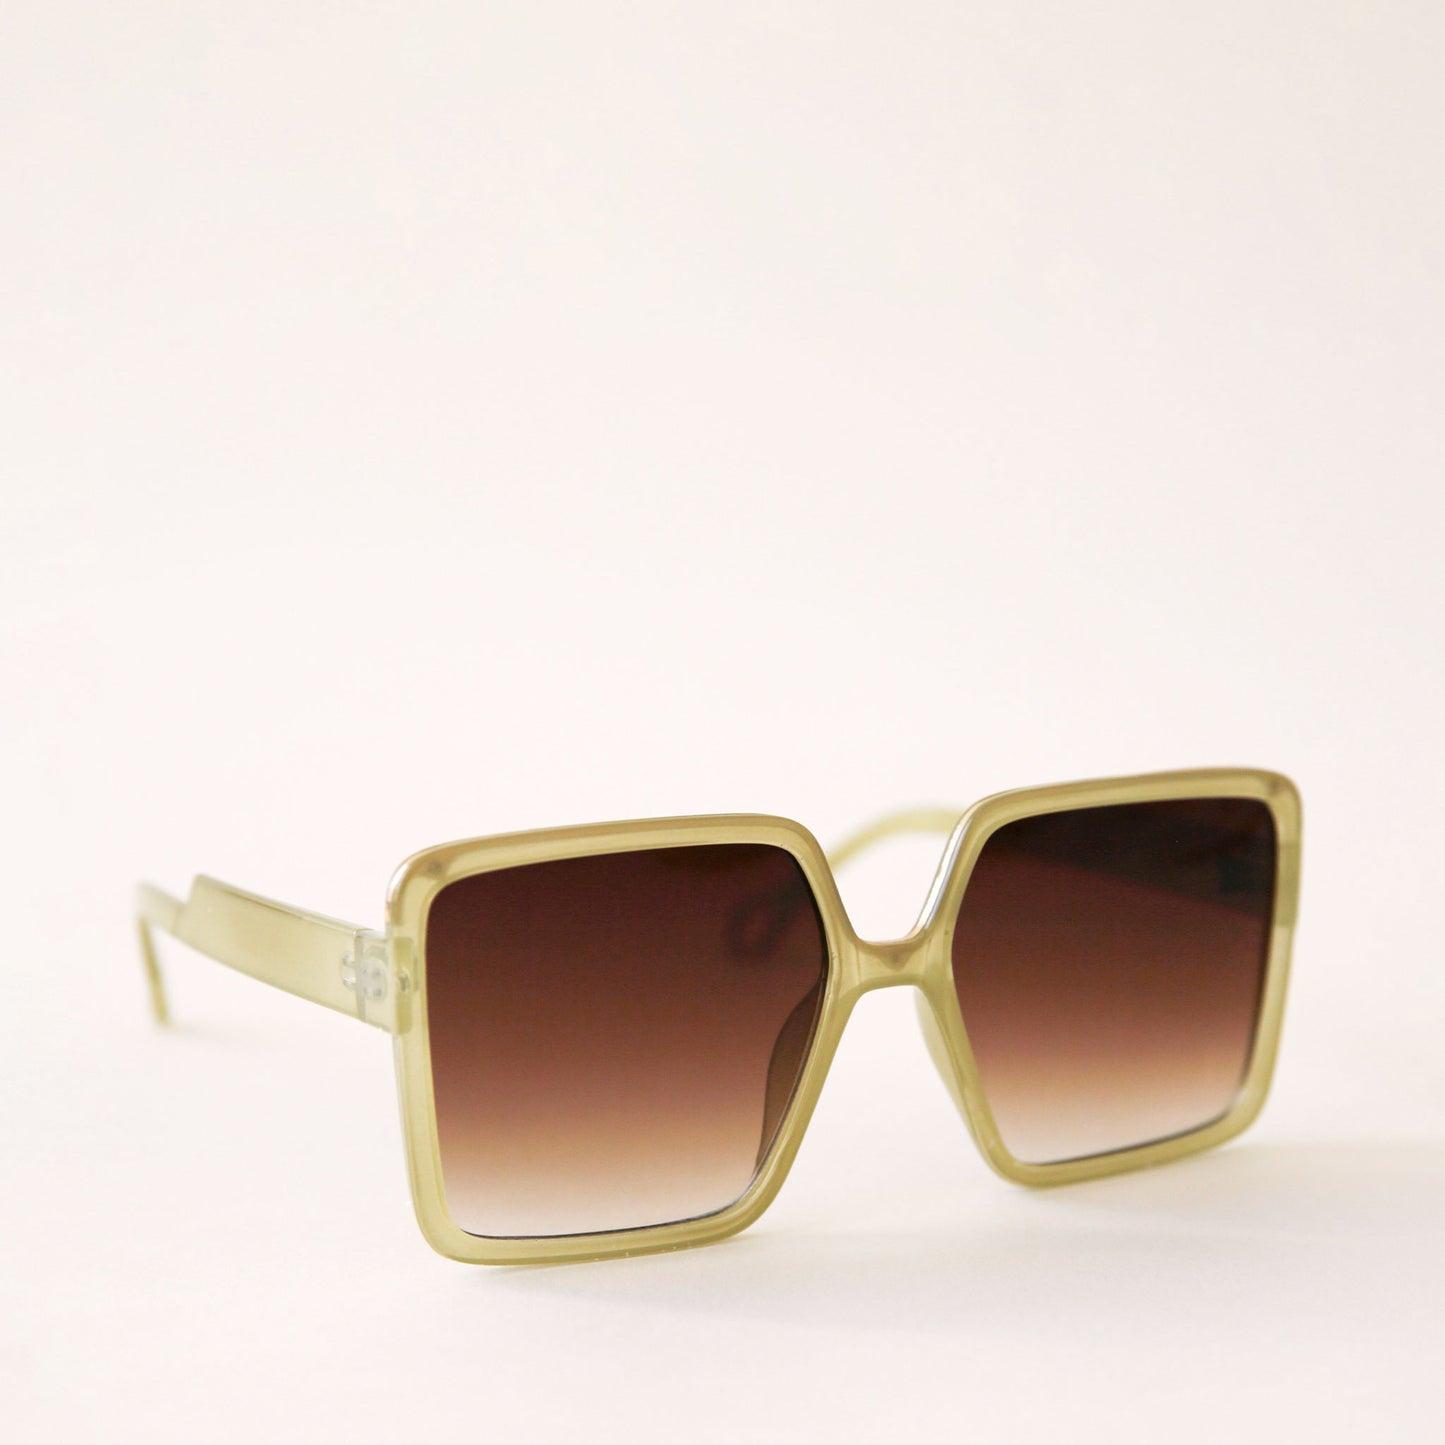 70's inspired square sunglasses with an olive green frame and a brown lens.